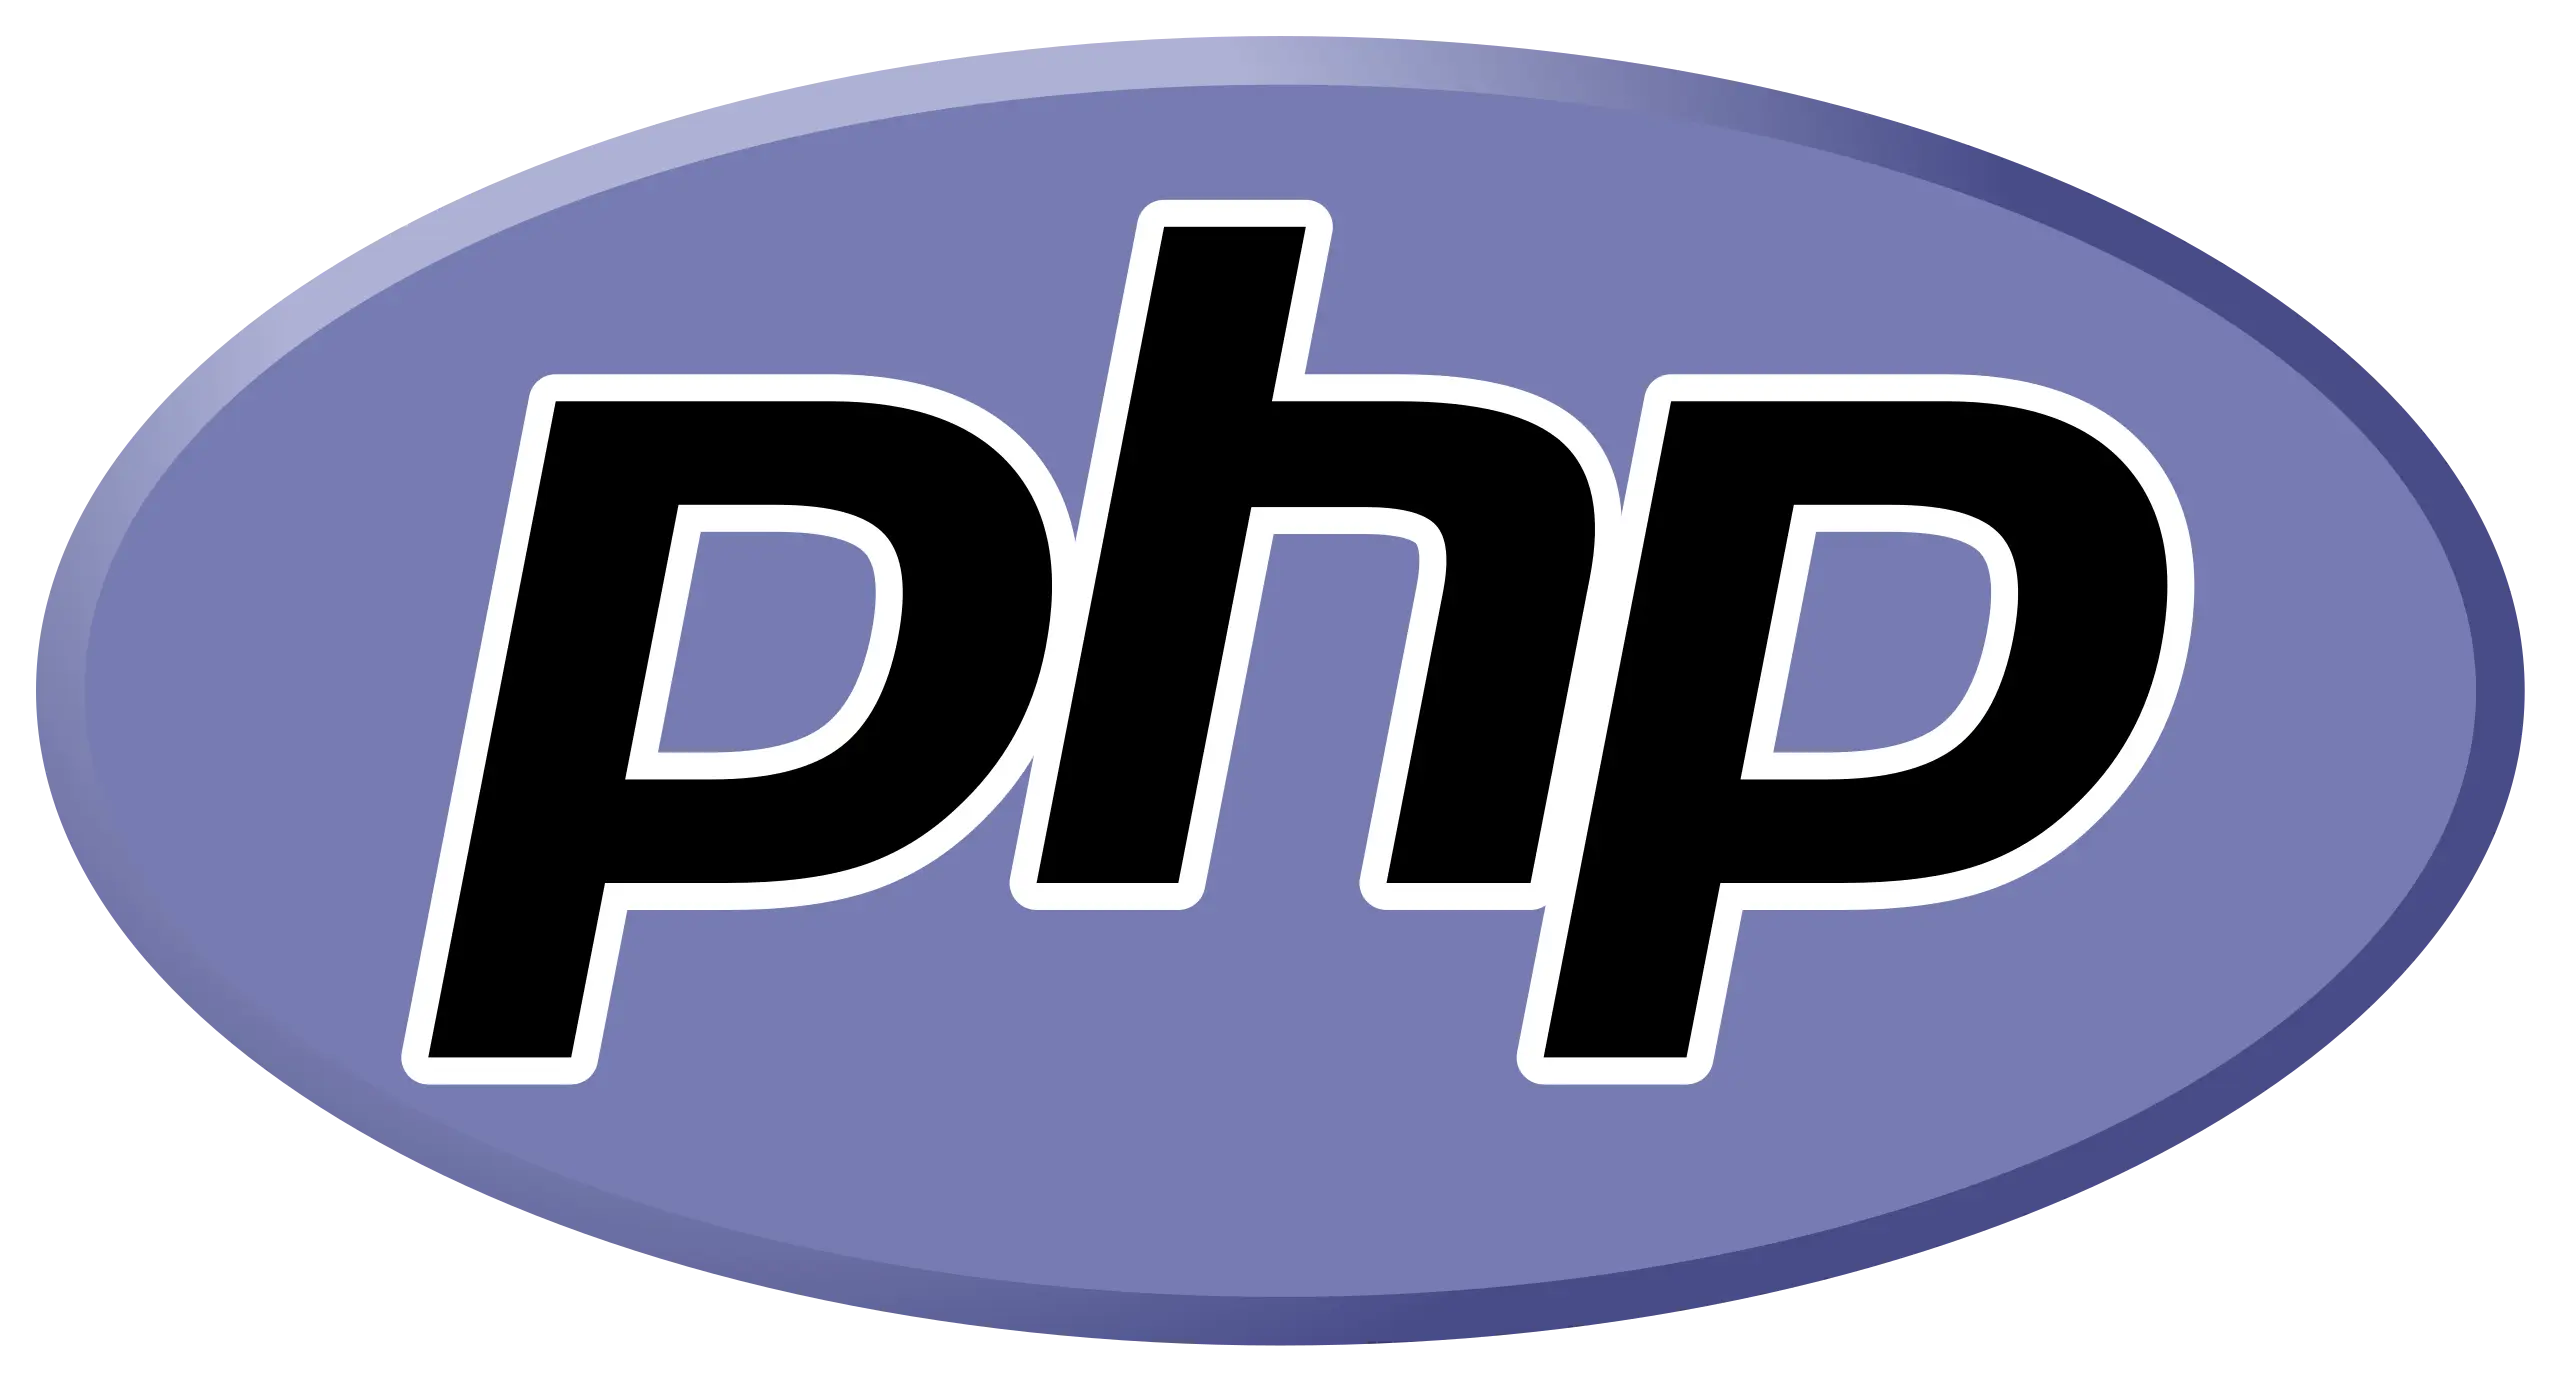 Top 8 Upcoming PHP Conferences that you shouldn't miss